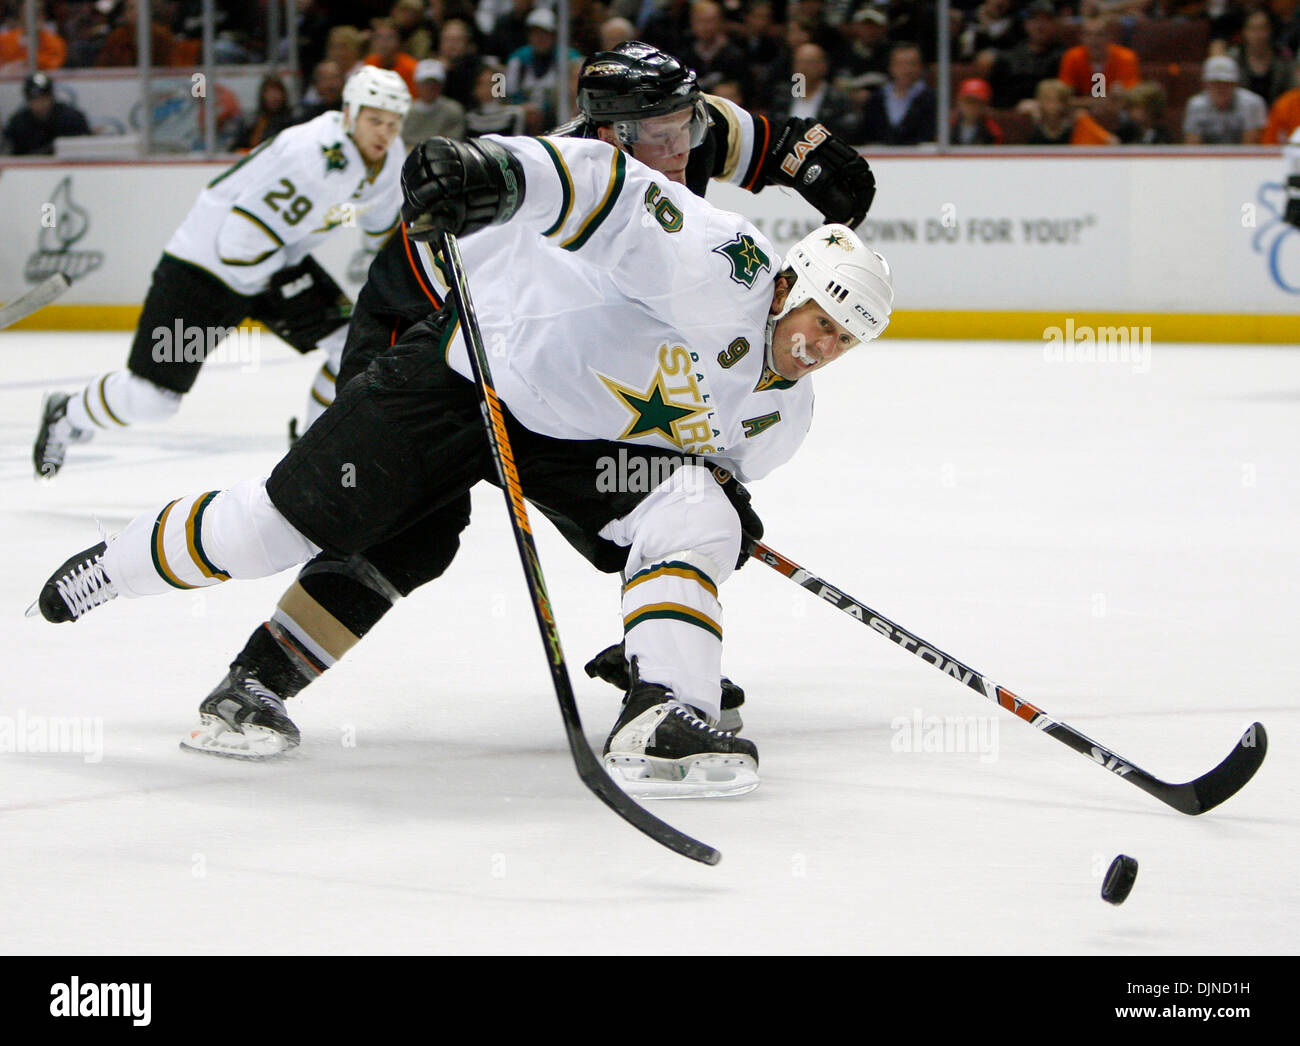 Apr 10, 2008 - Anaheim, California, USA - Dallas Stars center MIKE MODANO, right, and Anaheim Ducks center SAMUEL PAHLSSON, of Sweden, battle for the puck in the first period of the NHL Western Conference Quarterfinals. (Credit Image: © Mark Avery/ZUMA Press) Stock Photo